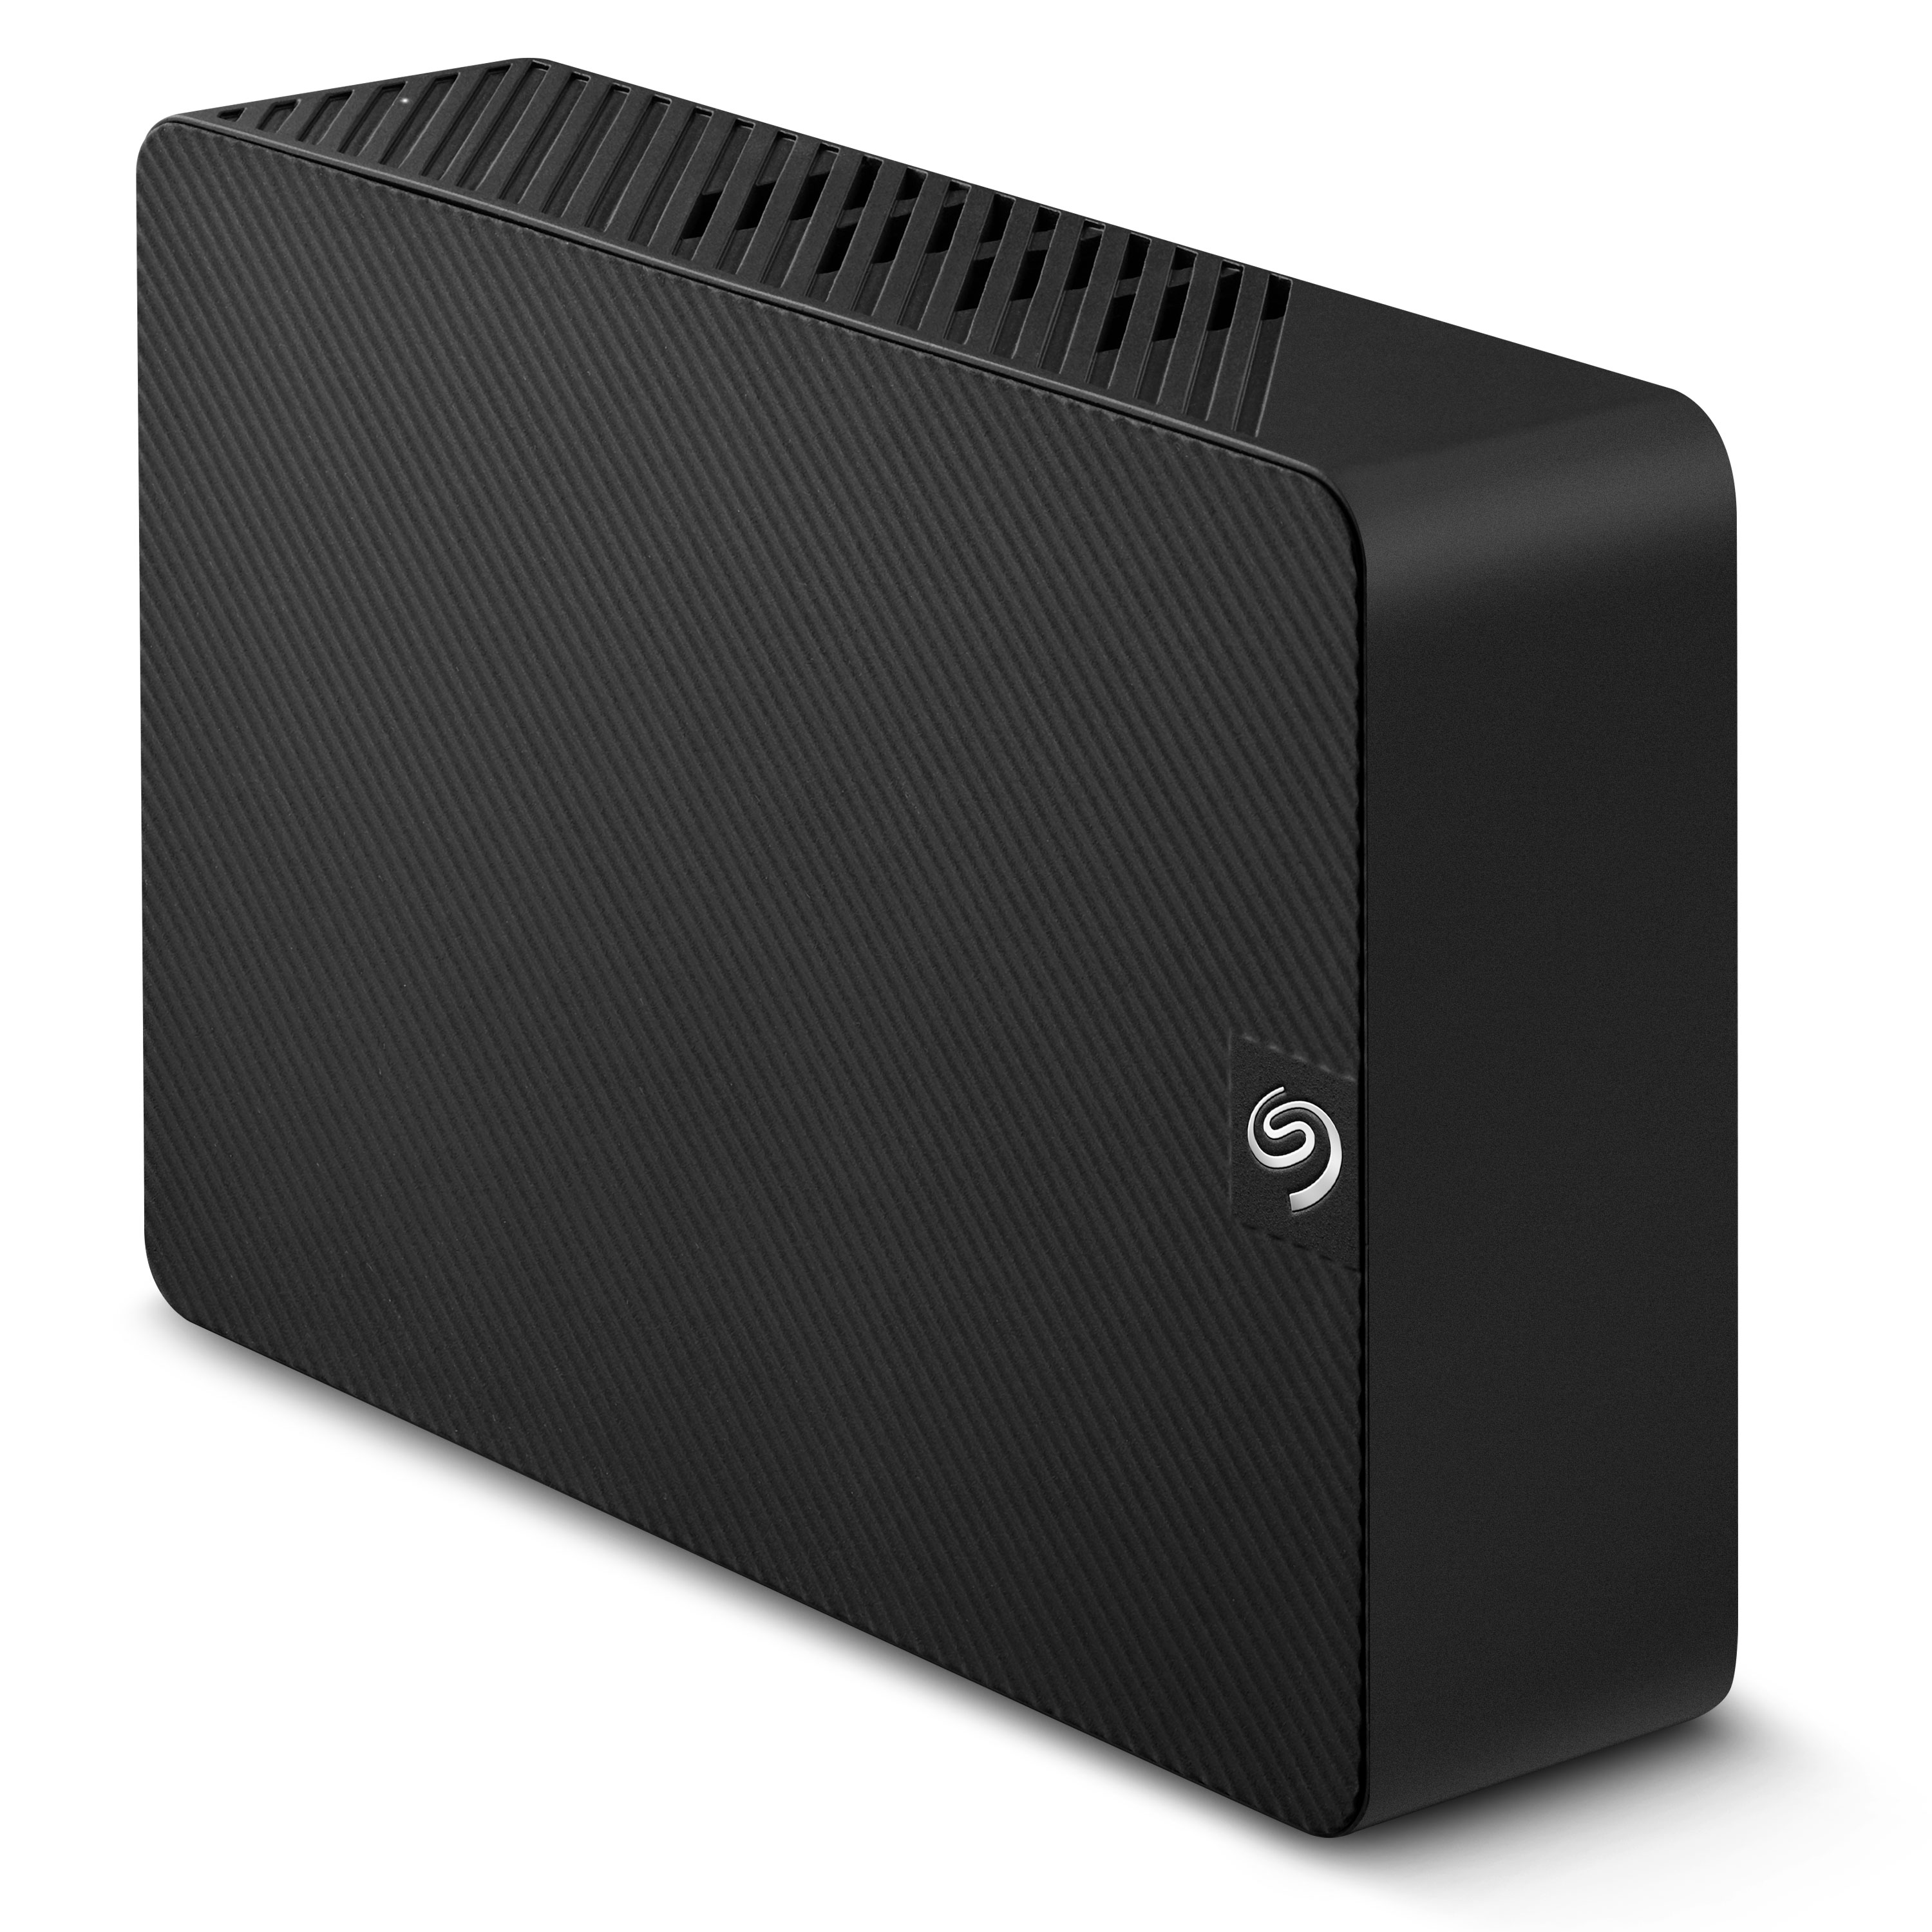 Seagate ExpansionPLUS 8TB External Hard Drive - USB 3.0 with Rescue Data Recovery (STKR8000400) - image 1 of 7